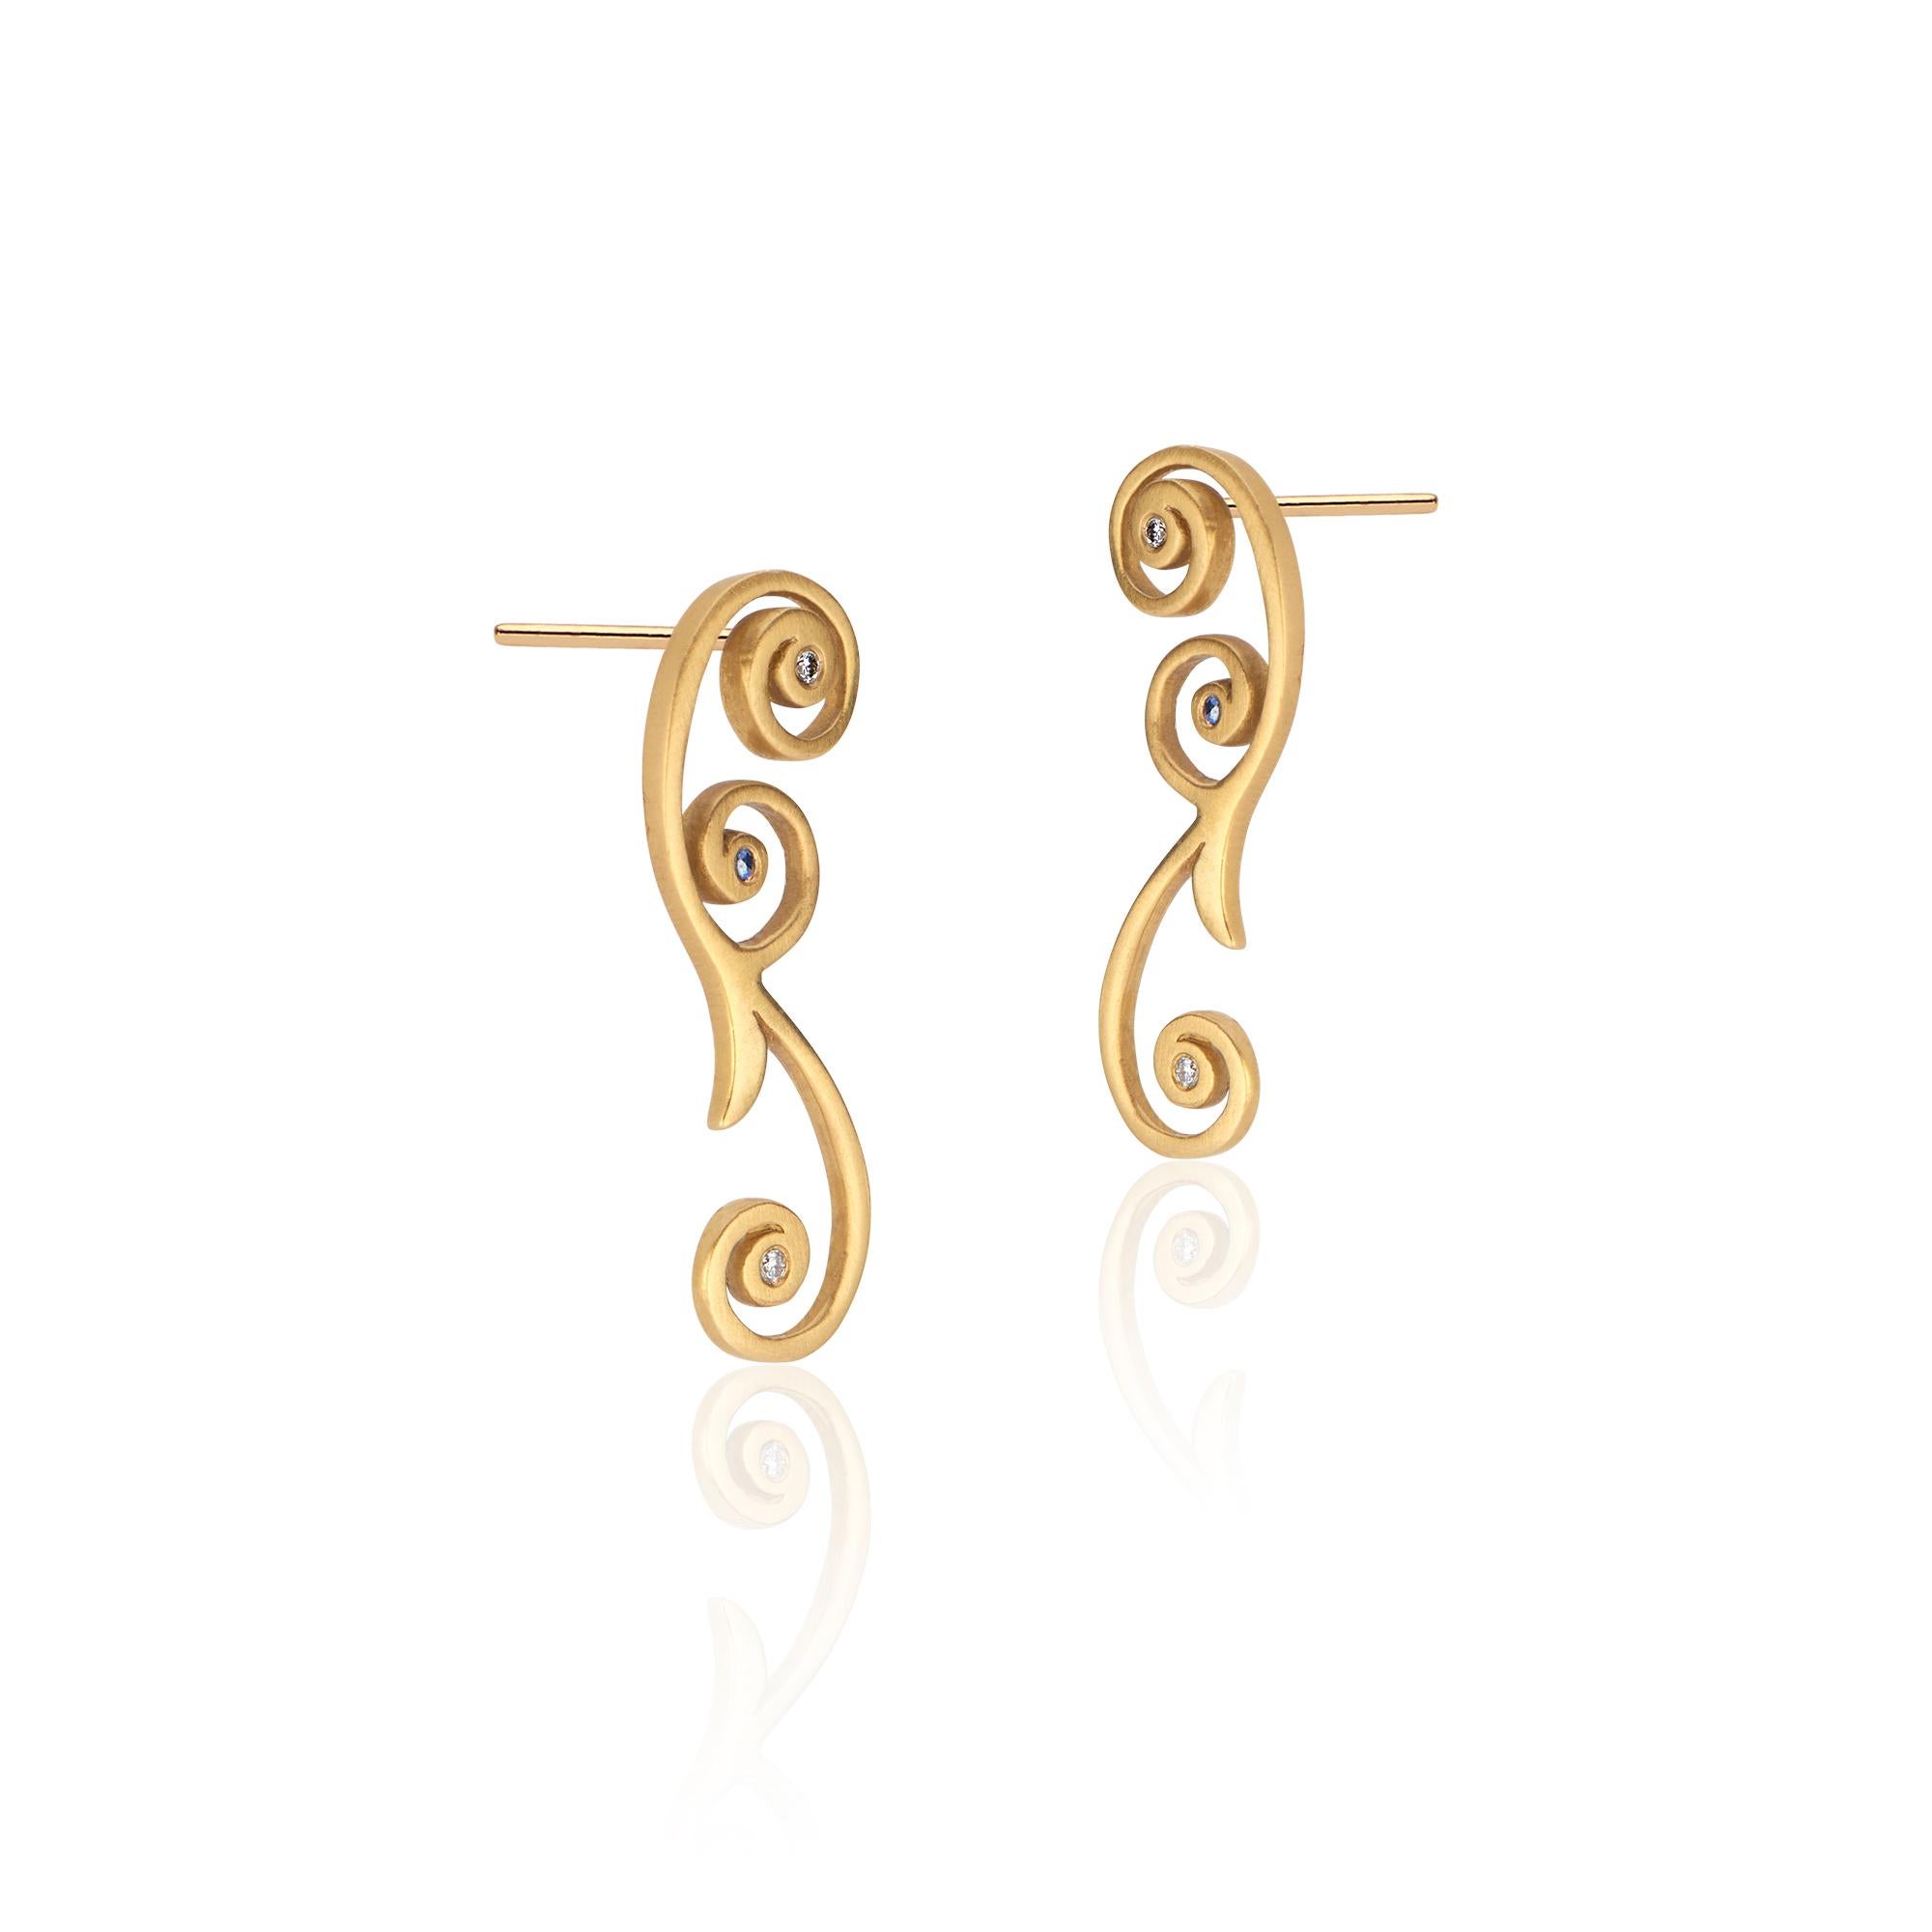 22k gold drop earrings approximately one inch long (25 millimeters), extending down from the ear with a slender tendril curl. Nestled in the heart of the curl of each earring are two 1.2 millimeter diamonds. Blue sapphires provide a surprising